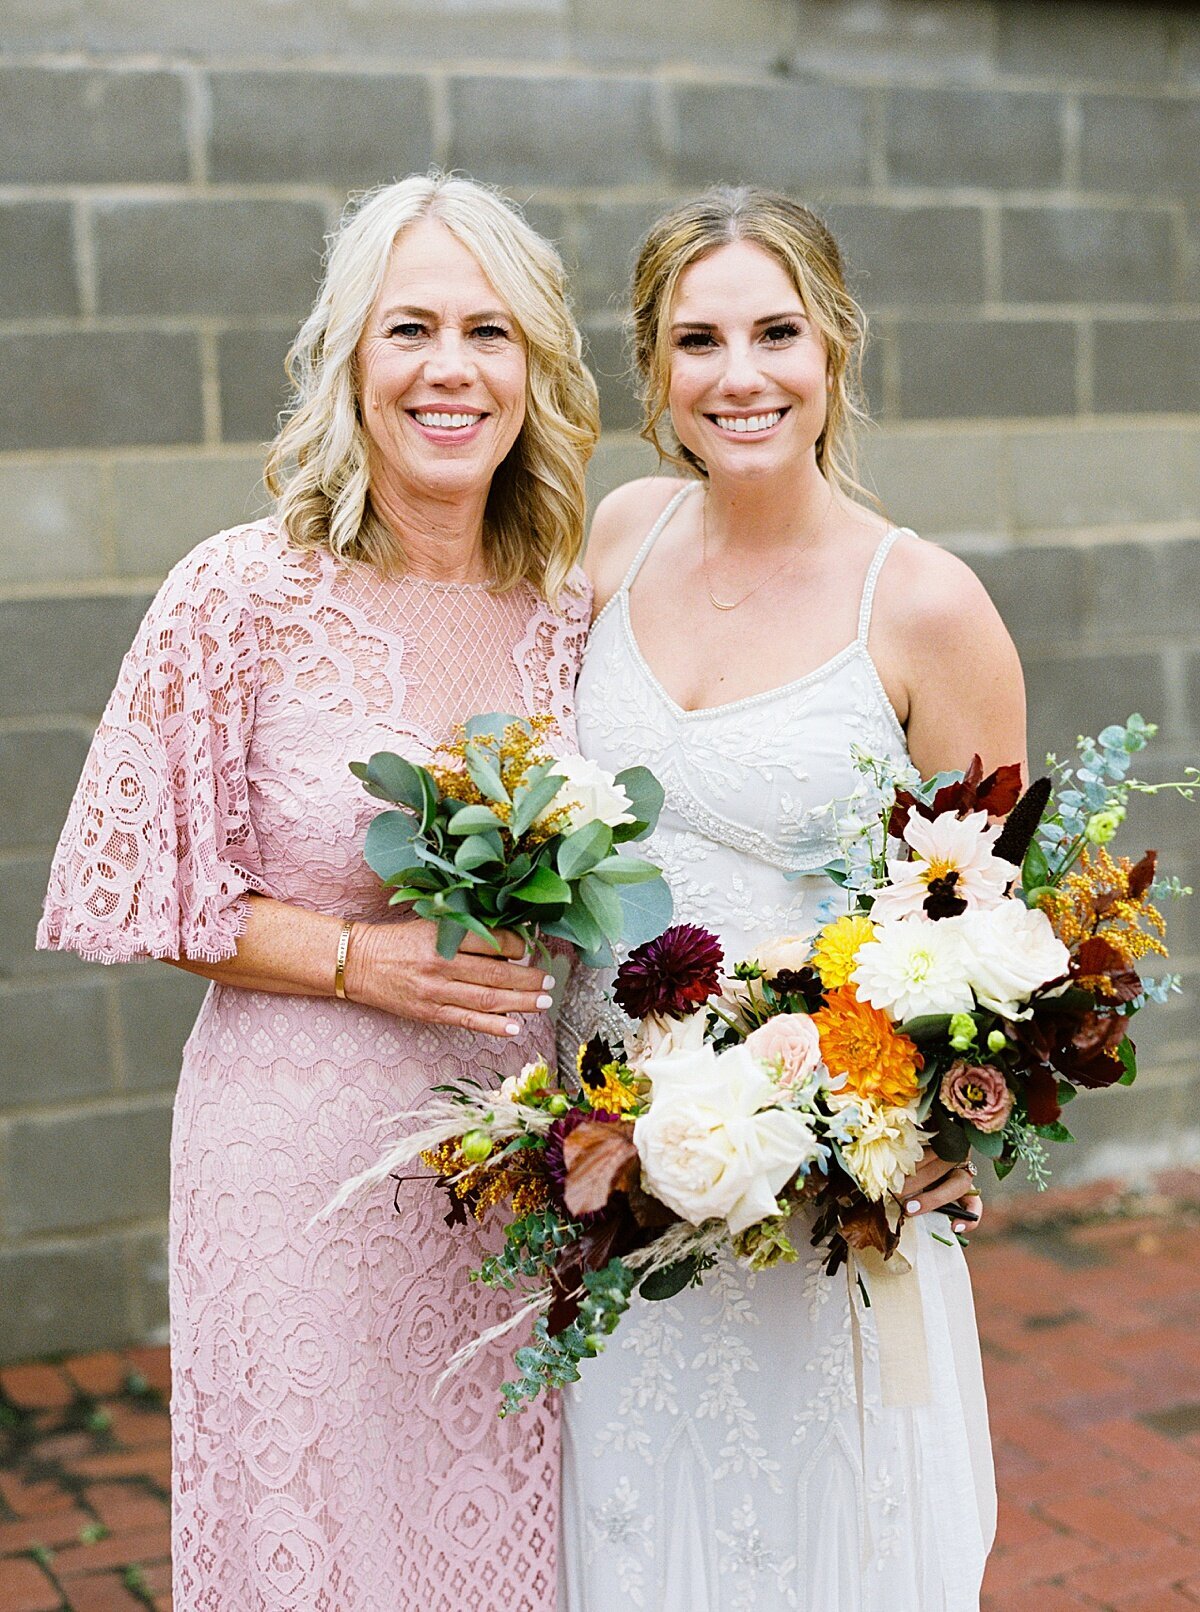 Bridesmaids with Fall floral bouquets at Mopac Event Center in Forth Worth, Texas | Vella Nest Floral Design